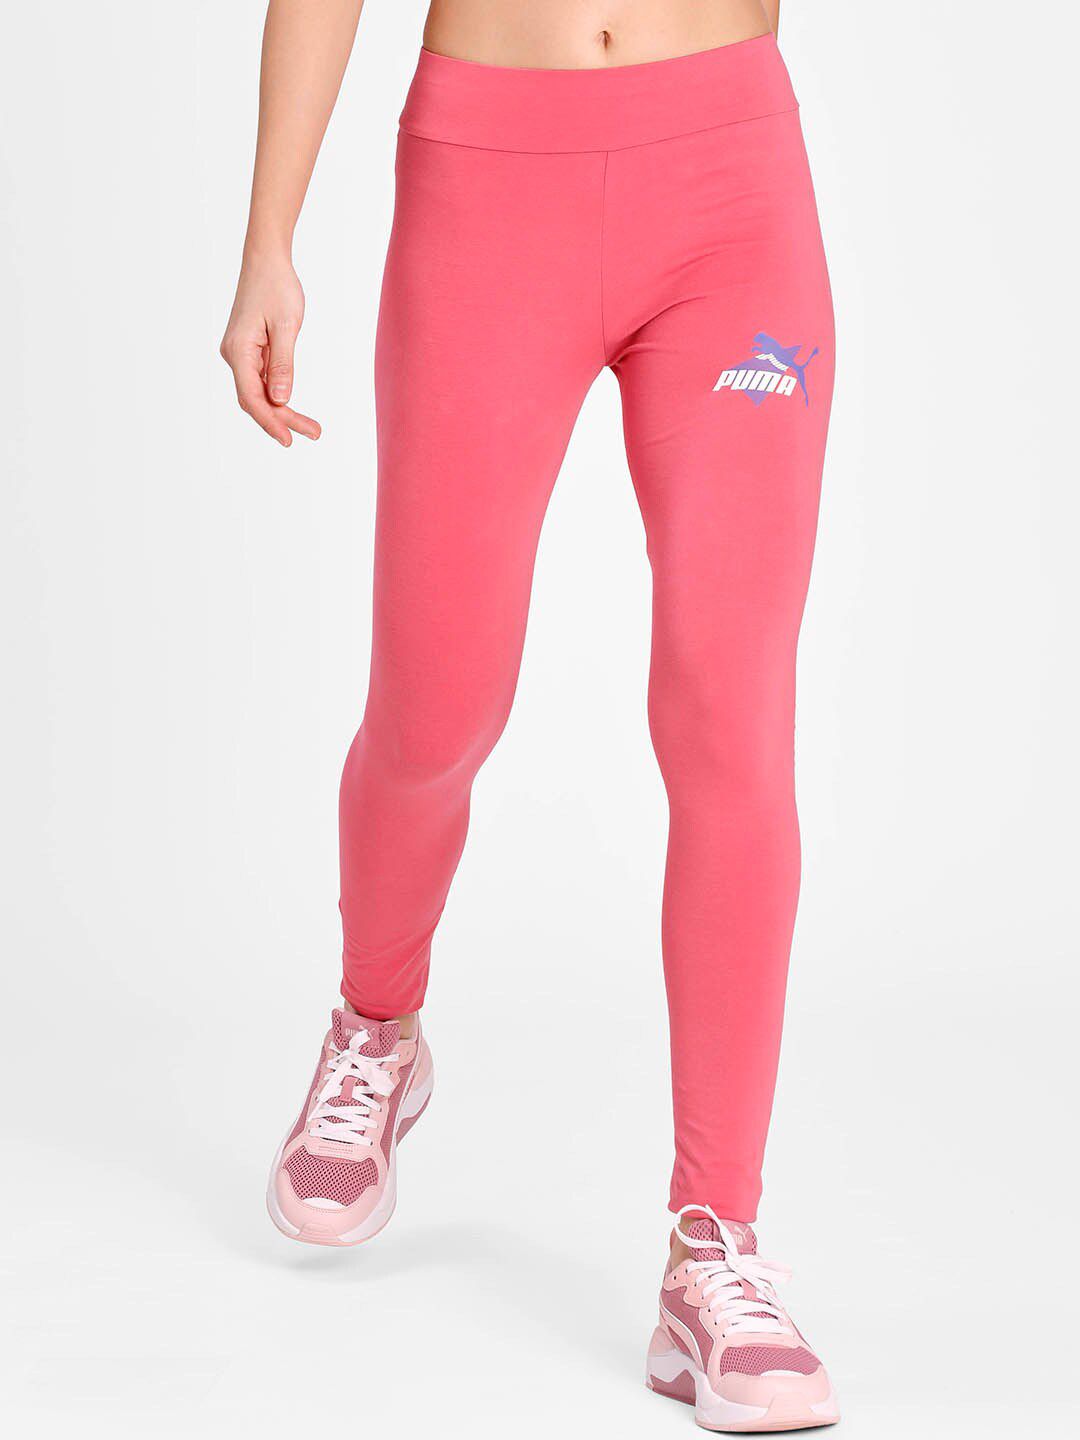 Puma Women Pink Solid Slant Graphic Tights Price in India